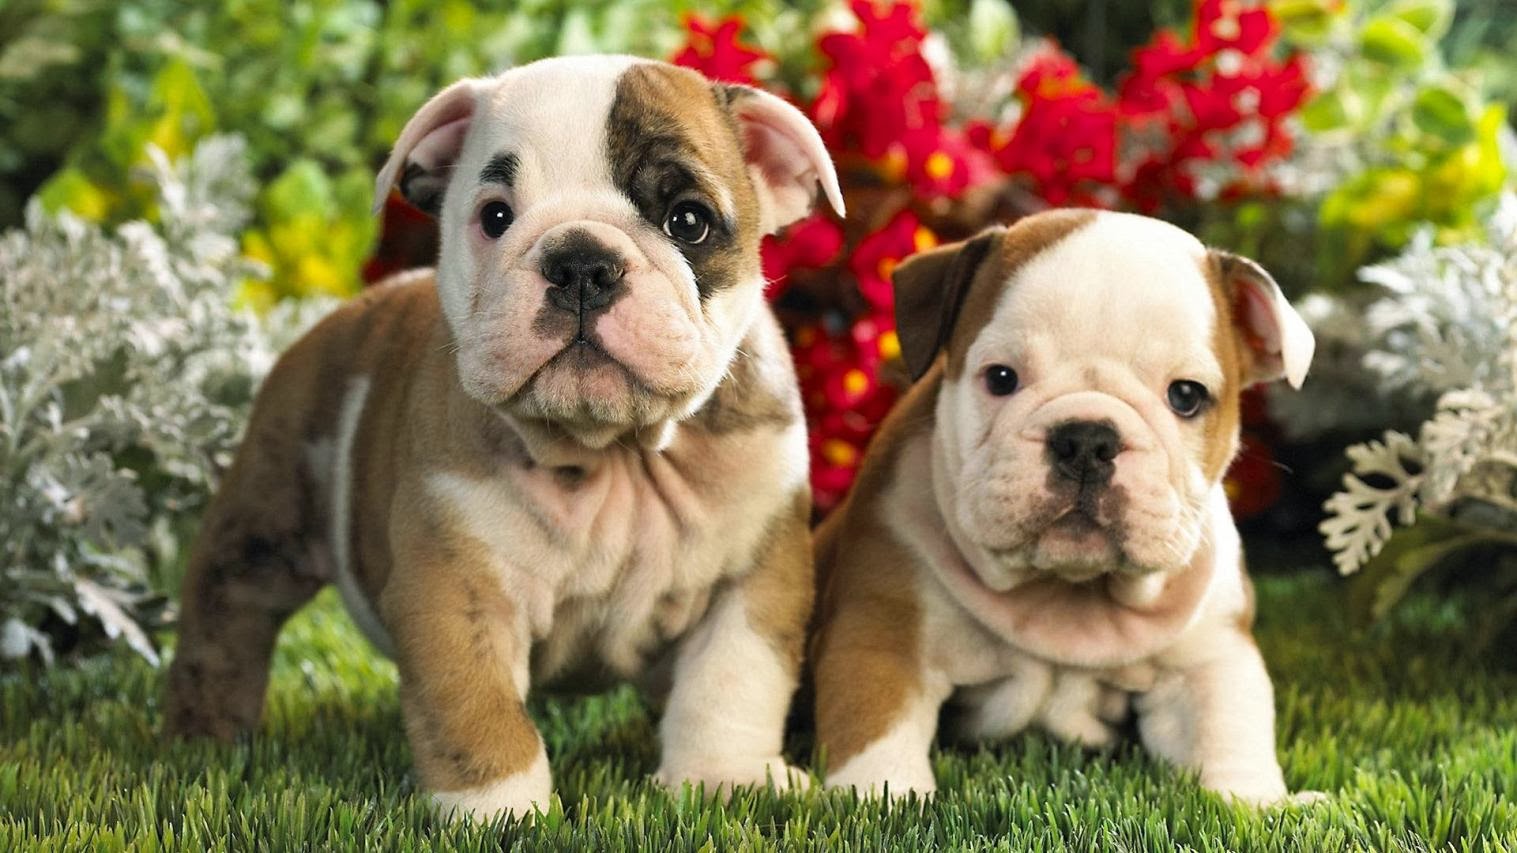 Cute Puppies With Flowers Wallpapers Wallpaper High Quality Free